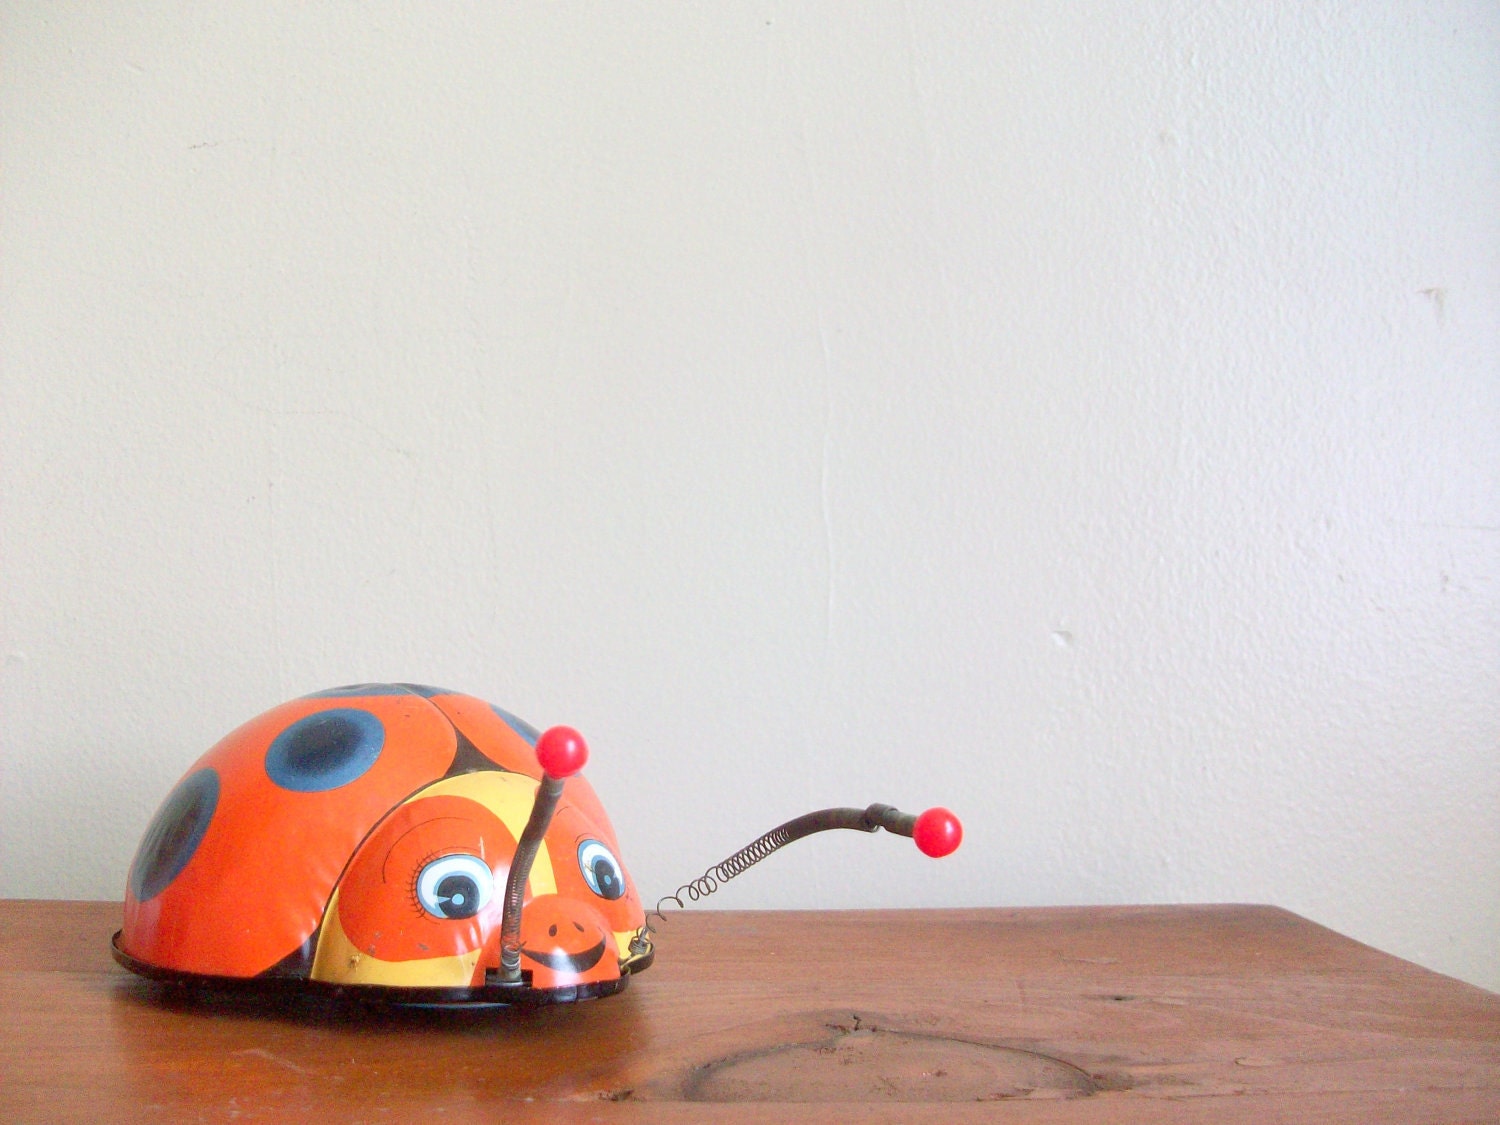 six dollar sale - reduced sale - mechanical wind up lady bug toy - for kids - insect - metal - compostthis